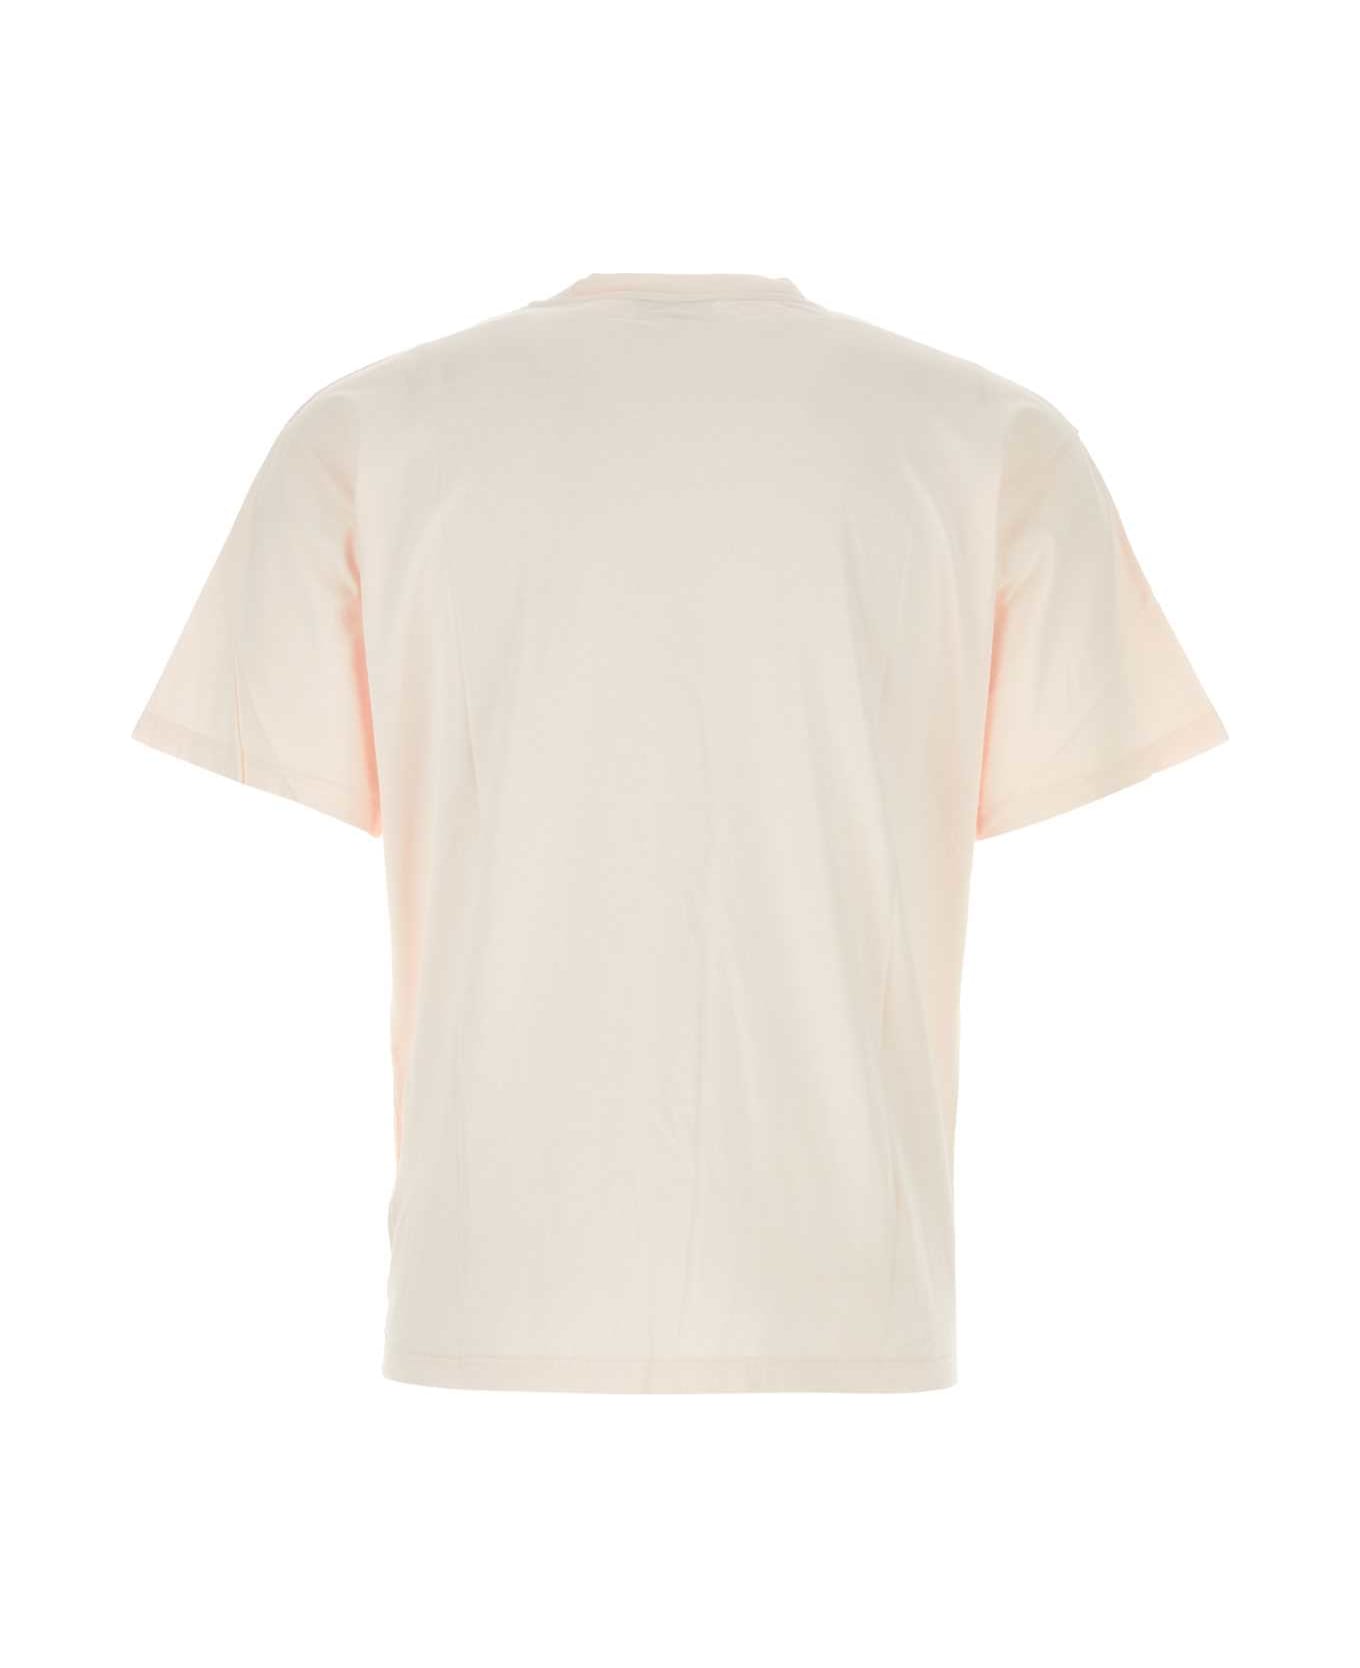 Aries Pastel Pink Cotton Temple T-shirt - PALEPINK